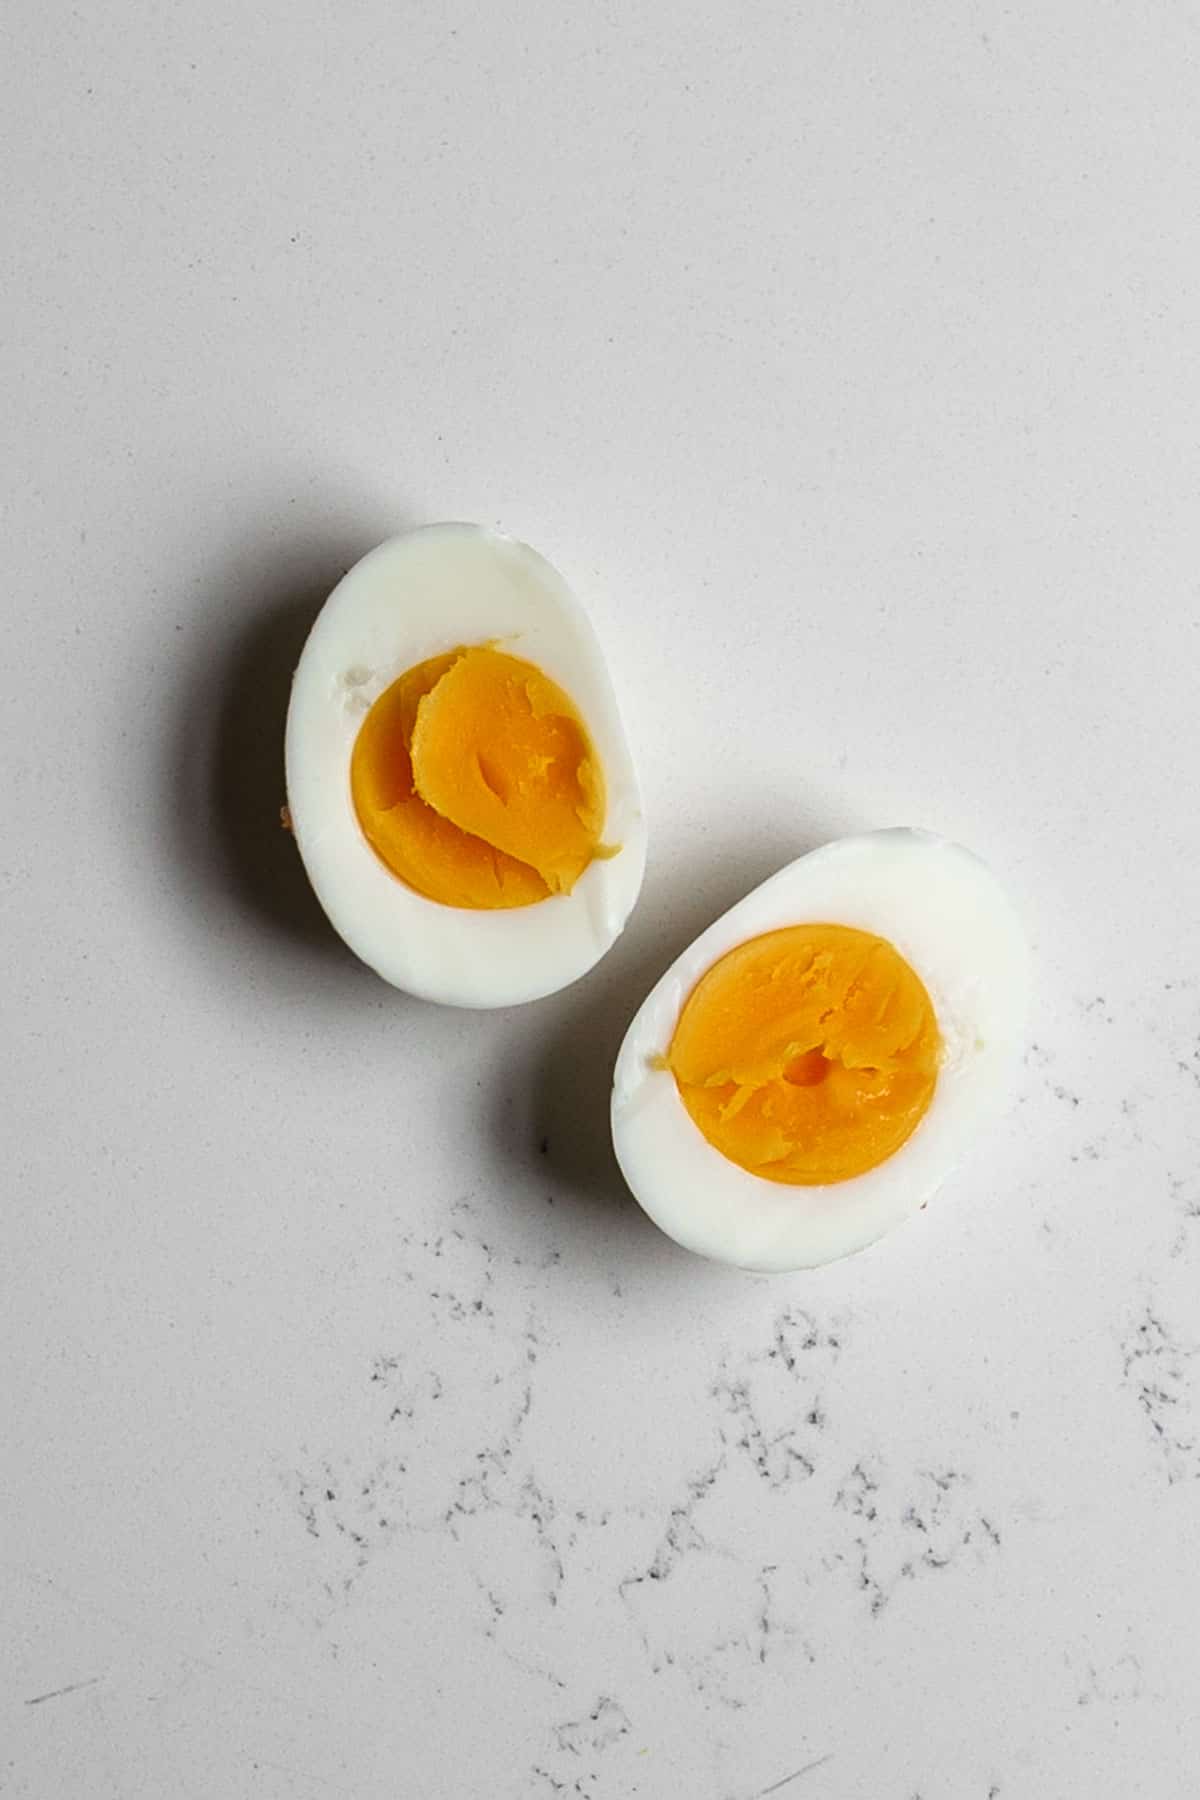 A hard boiled egg cut in half on a marble table.